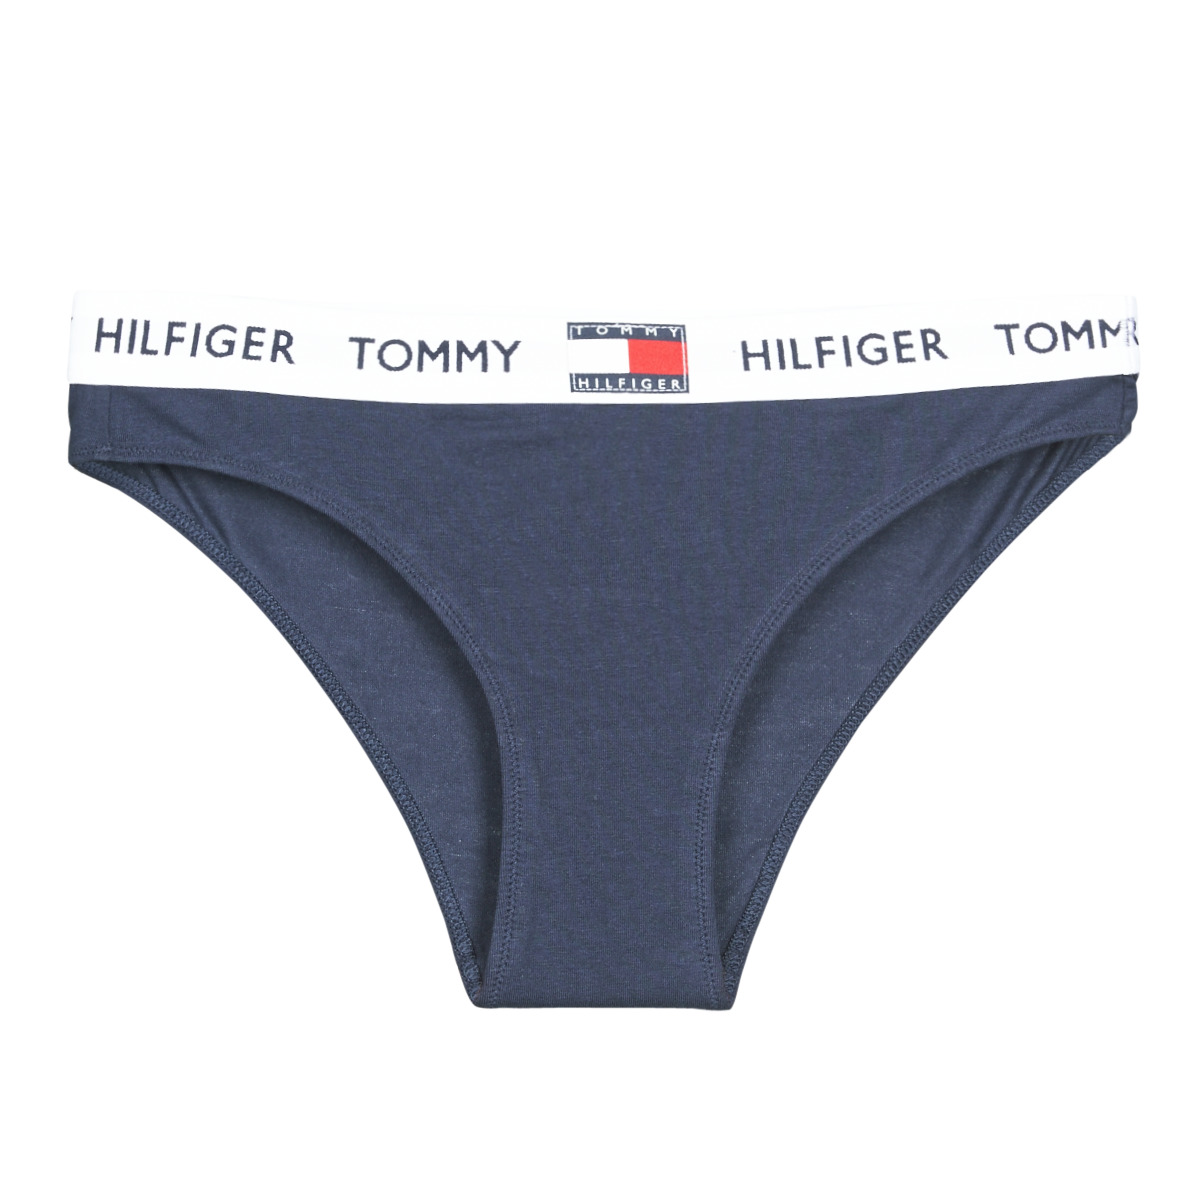 Tommy Hilfiger ORGANIC COTTON Marine - Fast delivery